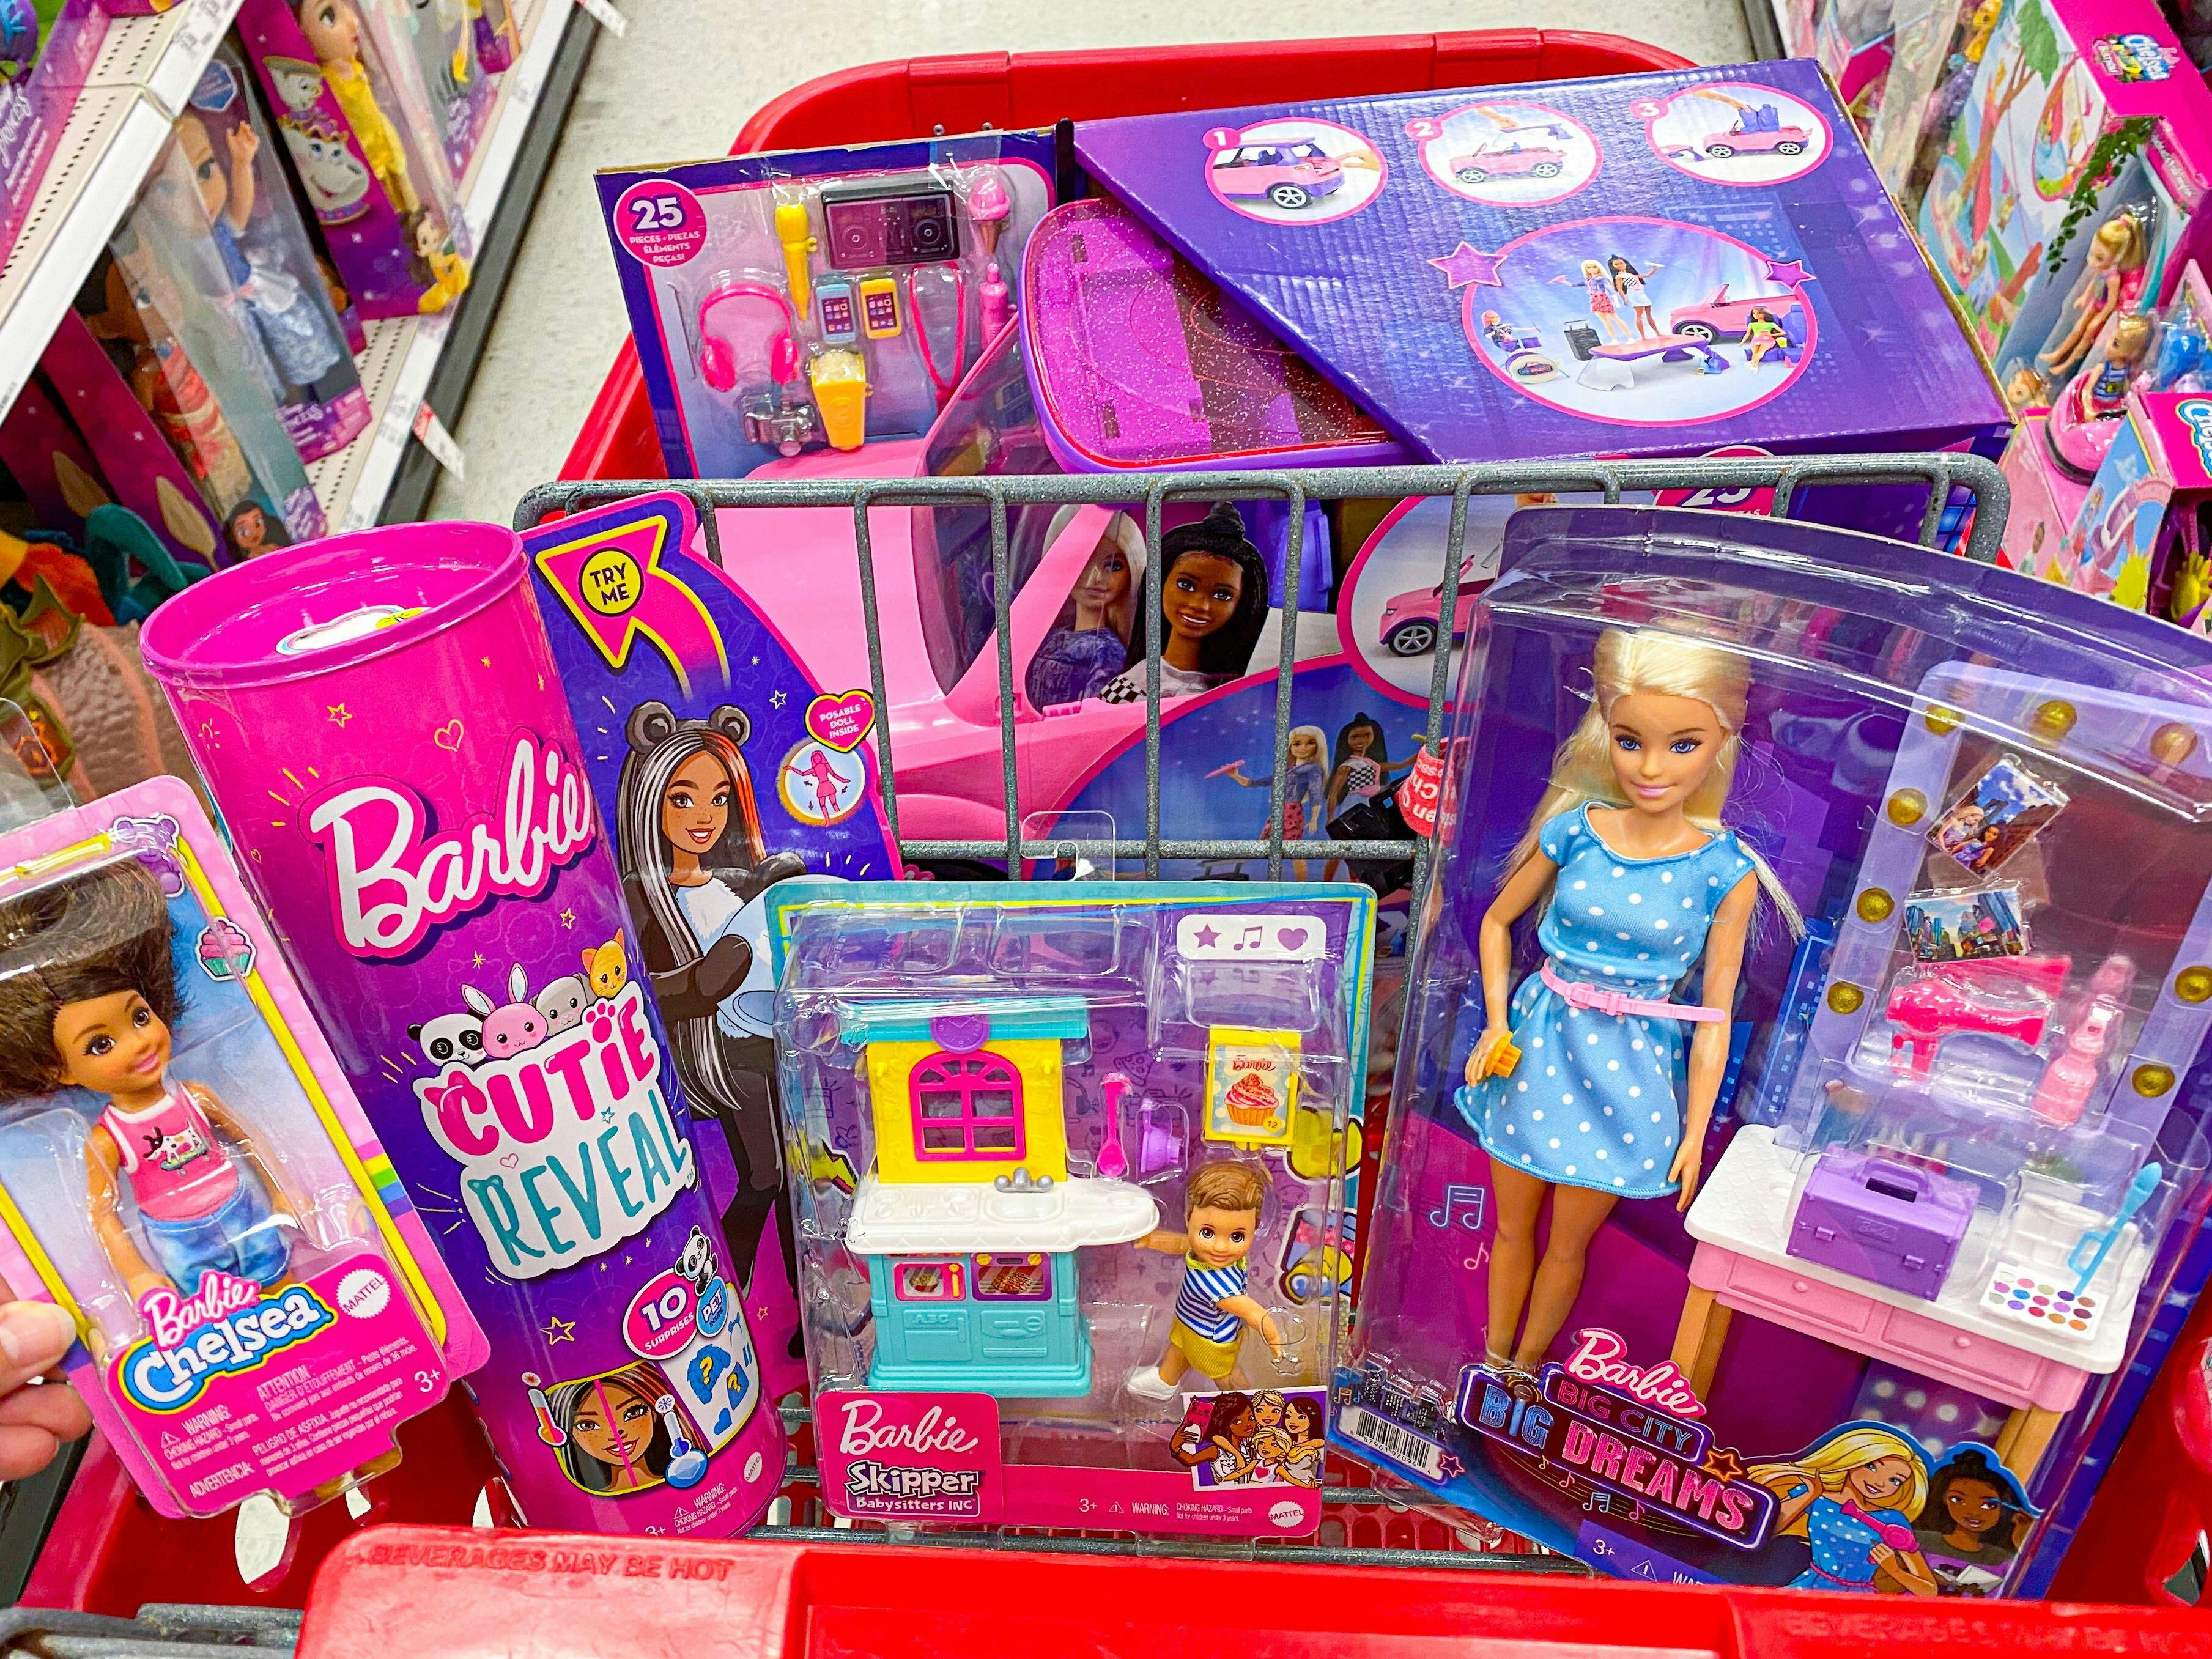 A Target shopping cart basket filled with Barbie toys.